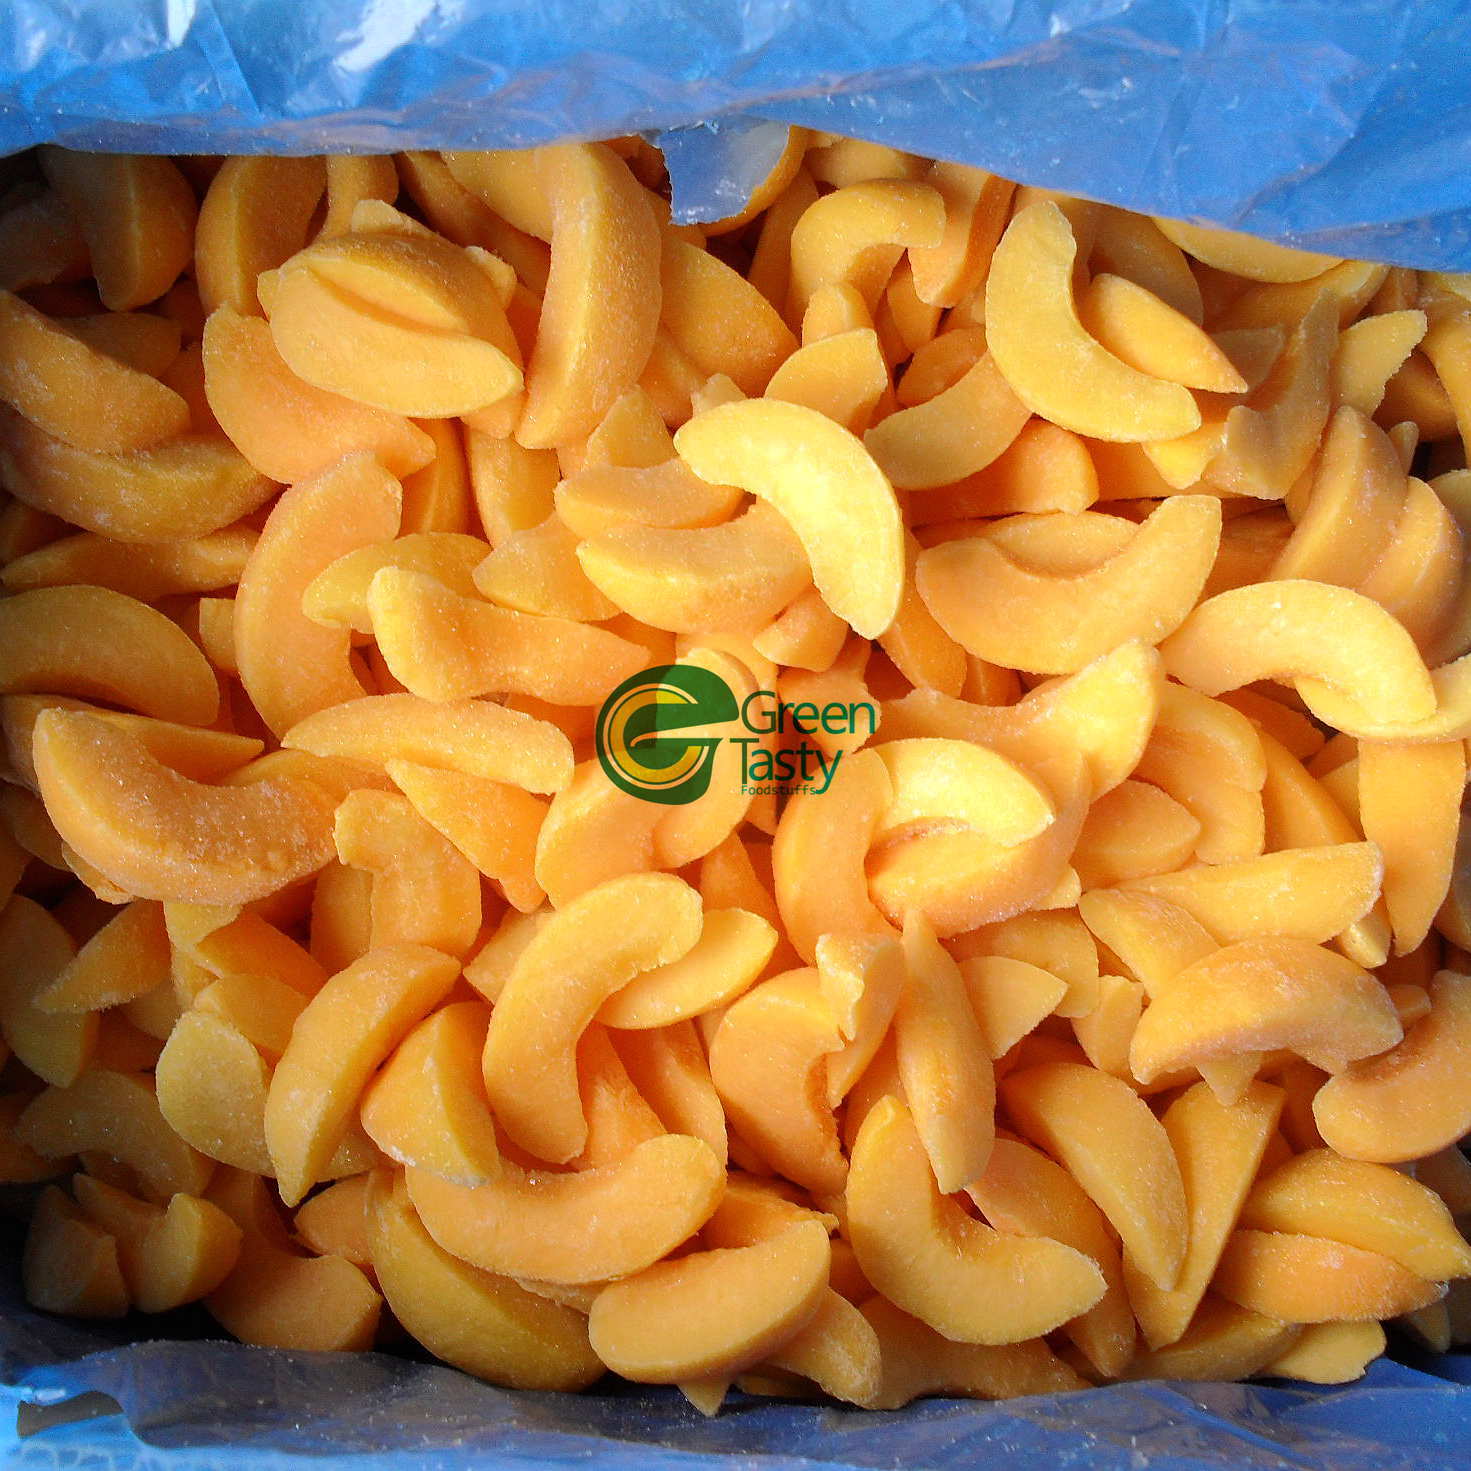 2015 New Crop IQF Frozen Apricot Slices